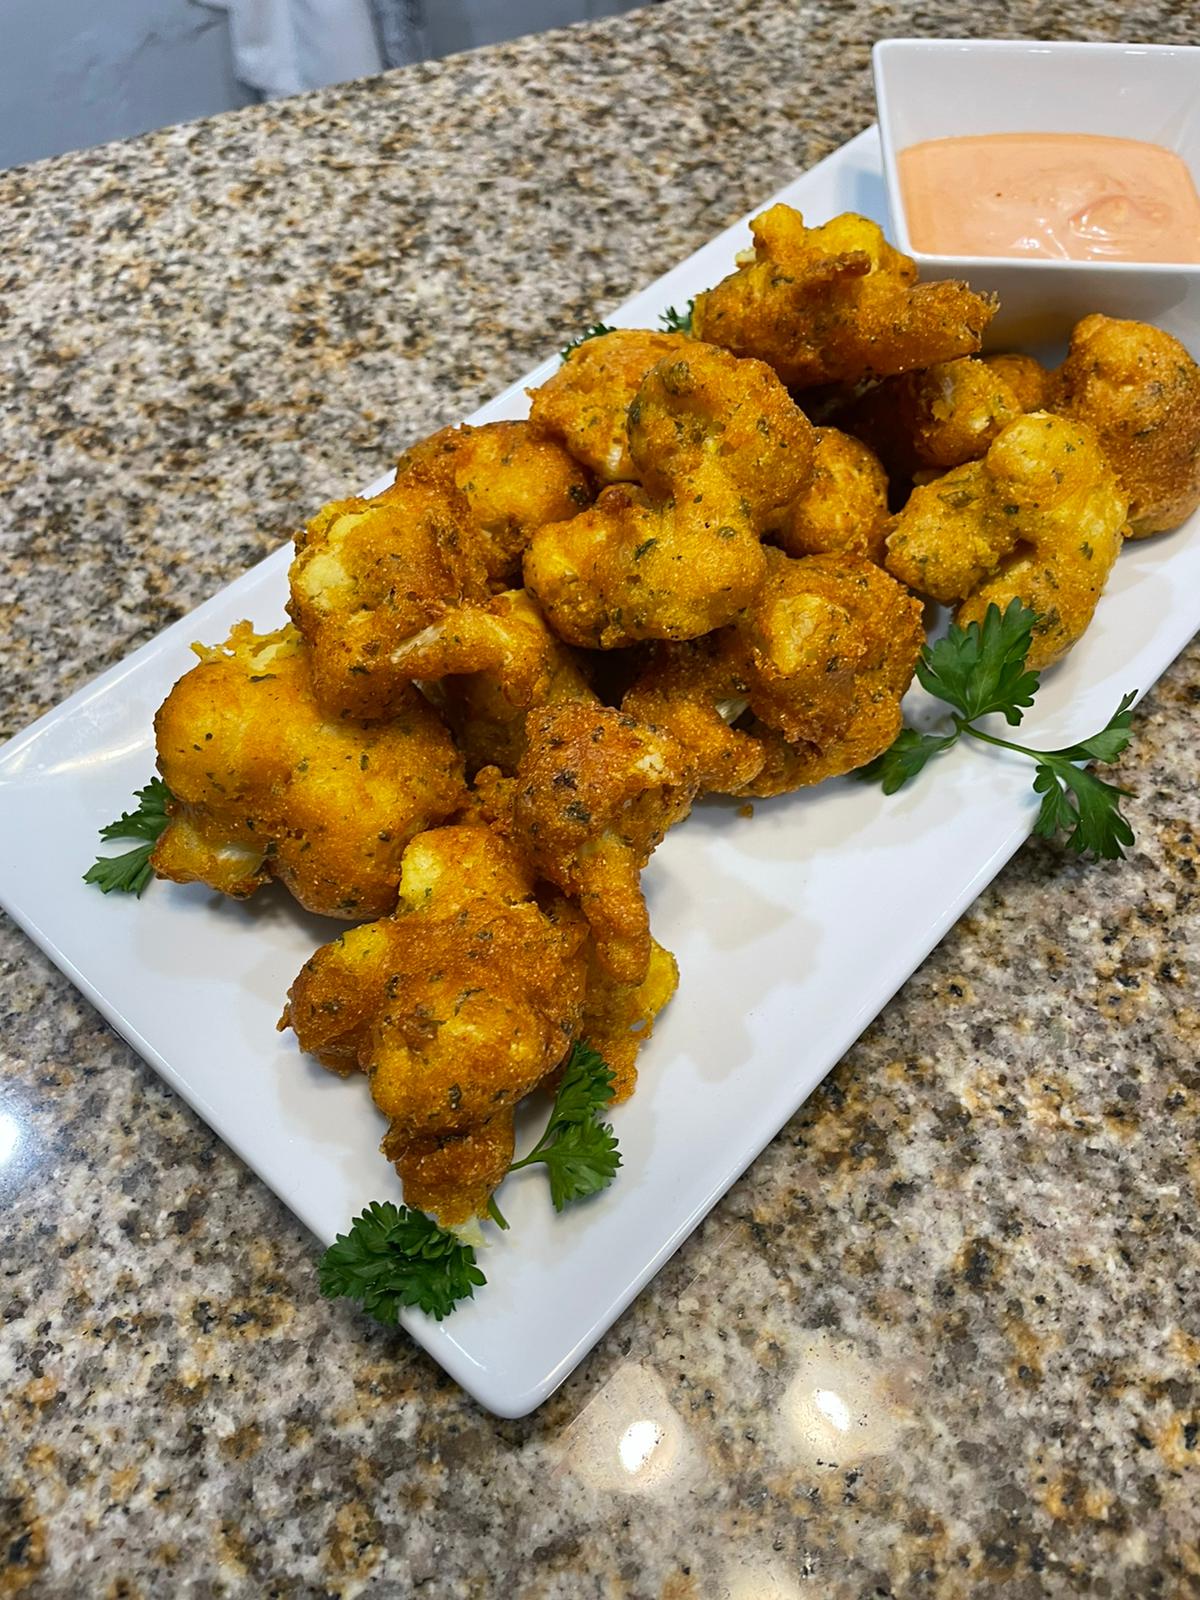 Battered cauliflower golden yellow in a rectangle white tray garnished with parsley on a marbled counter